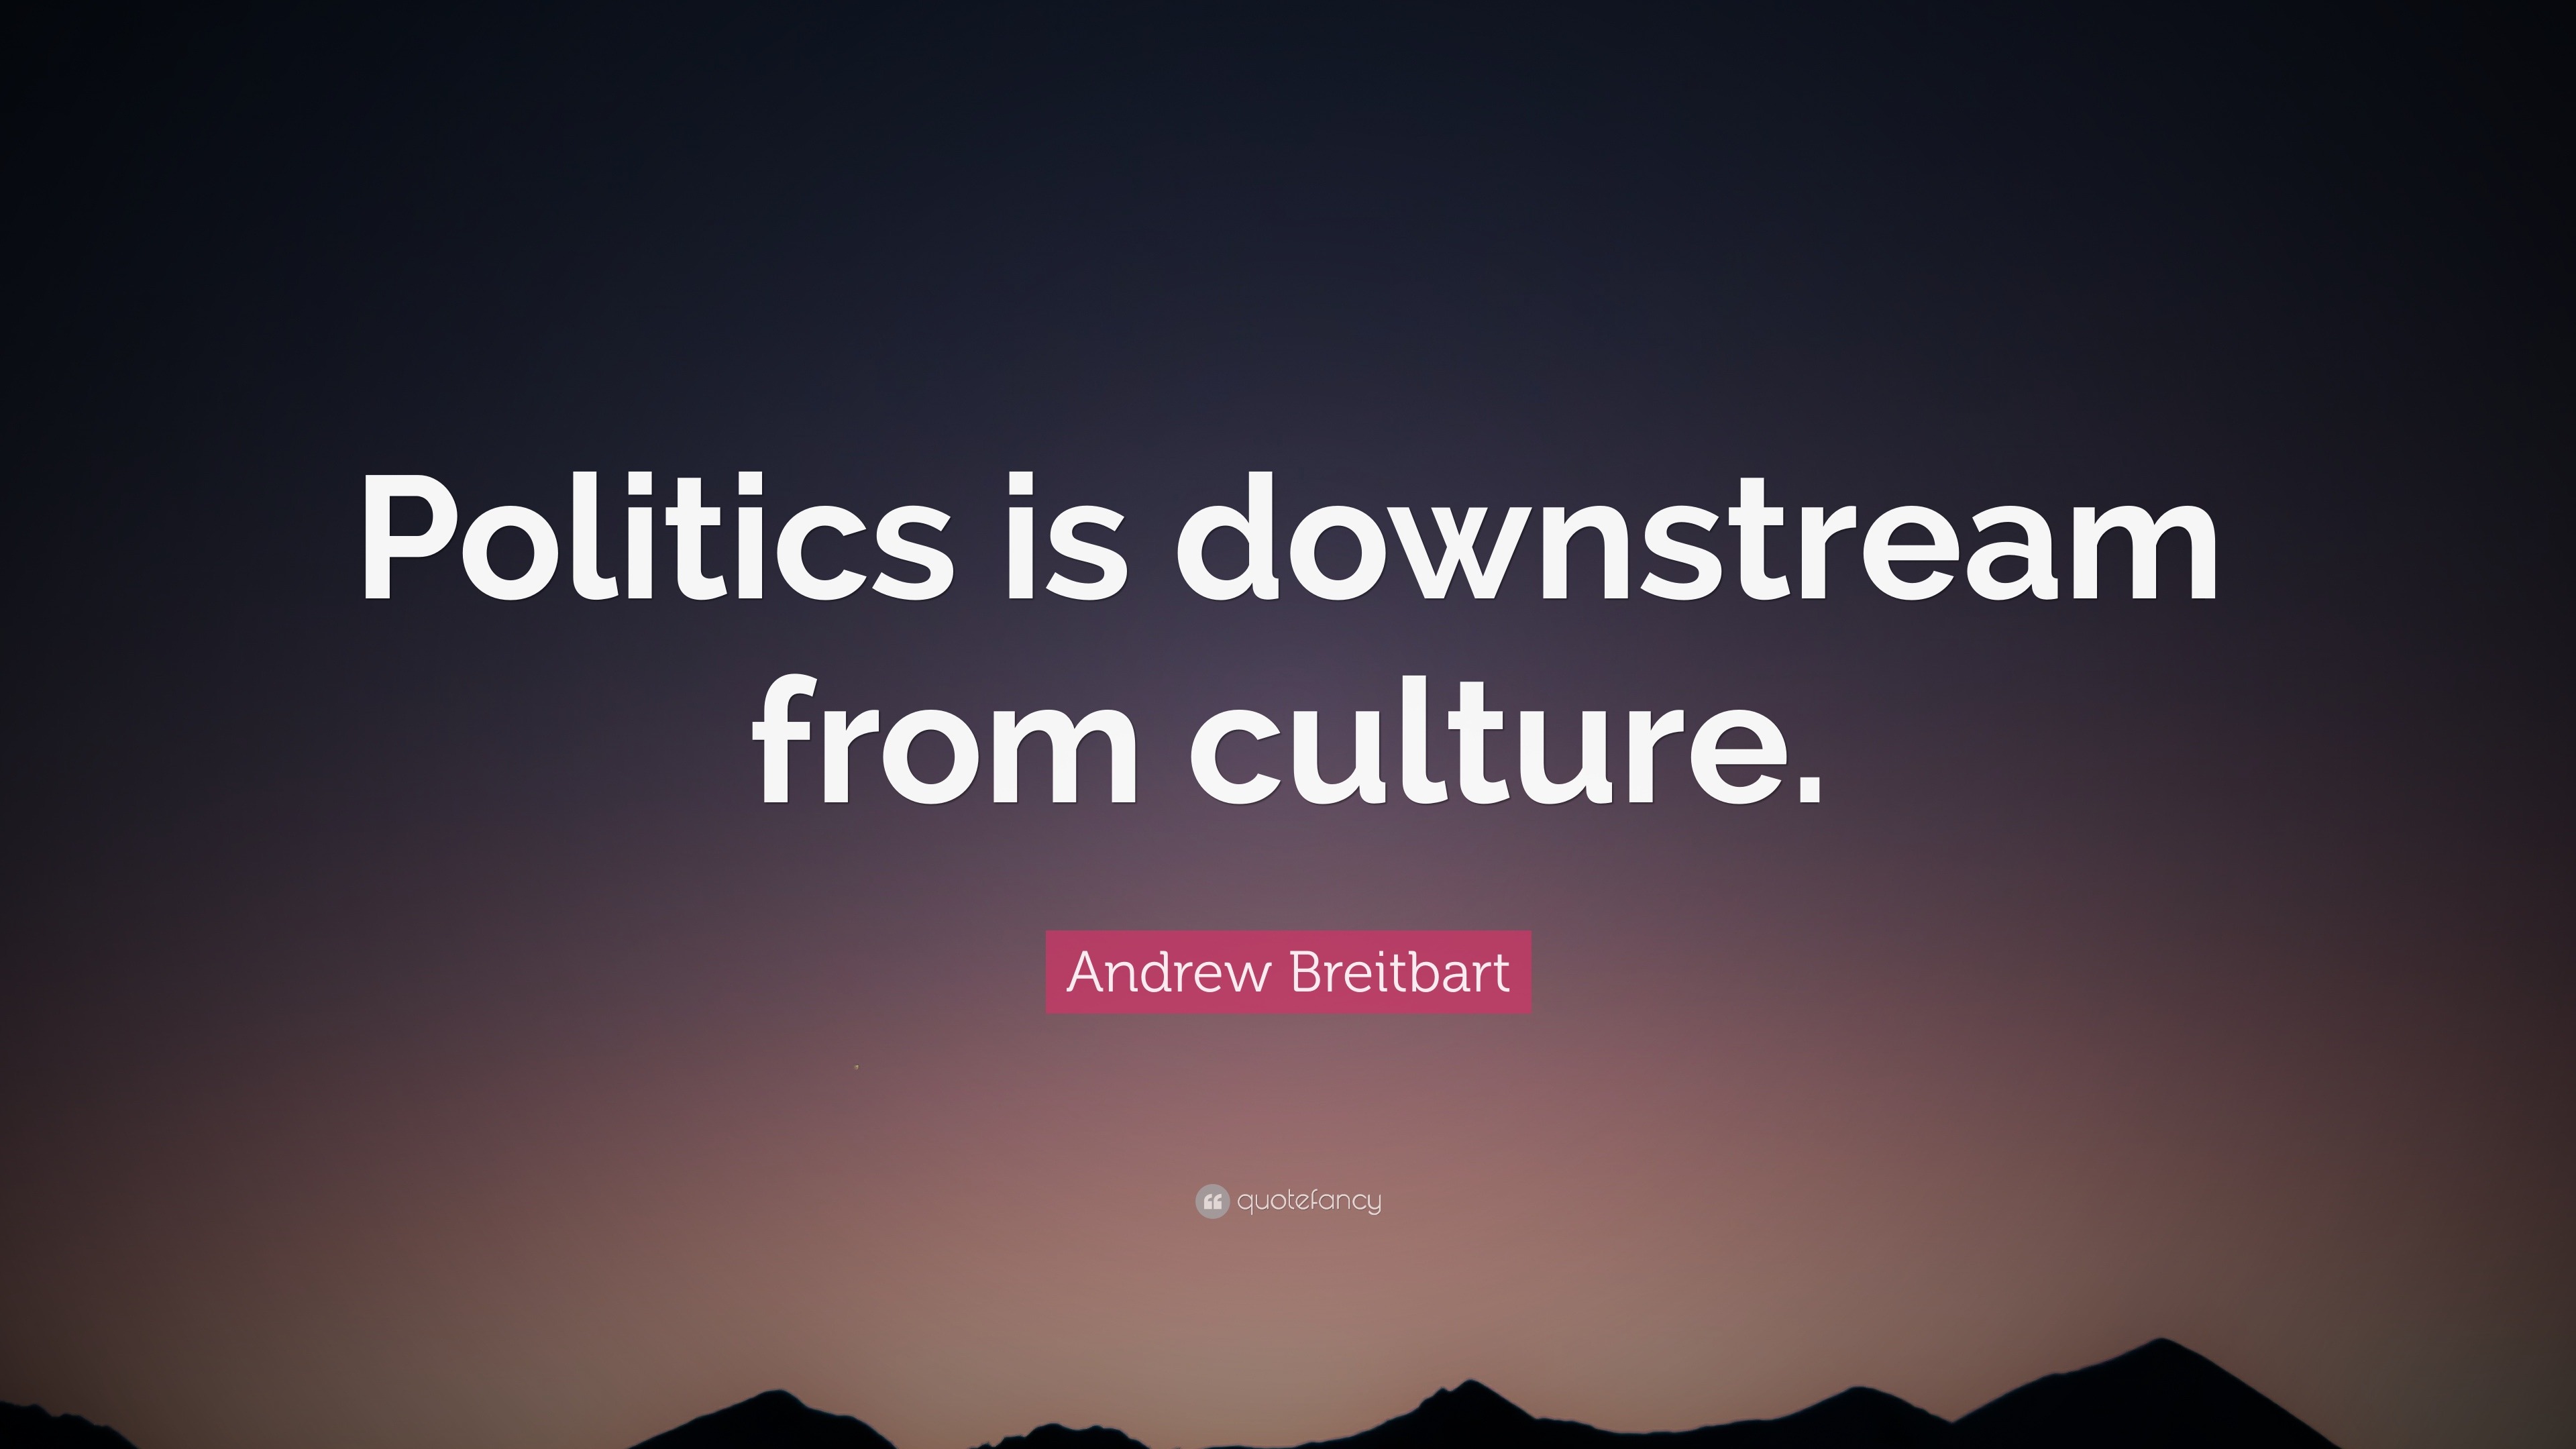 Andrew Breitbart Quote: “Politics is downstream from culture.”